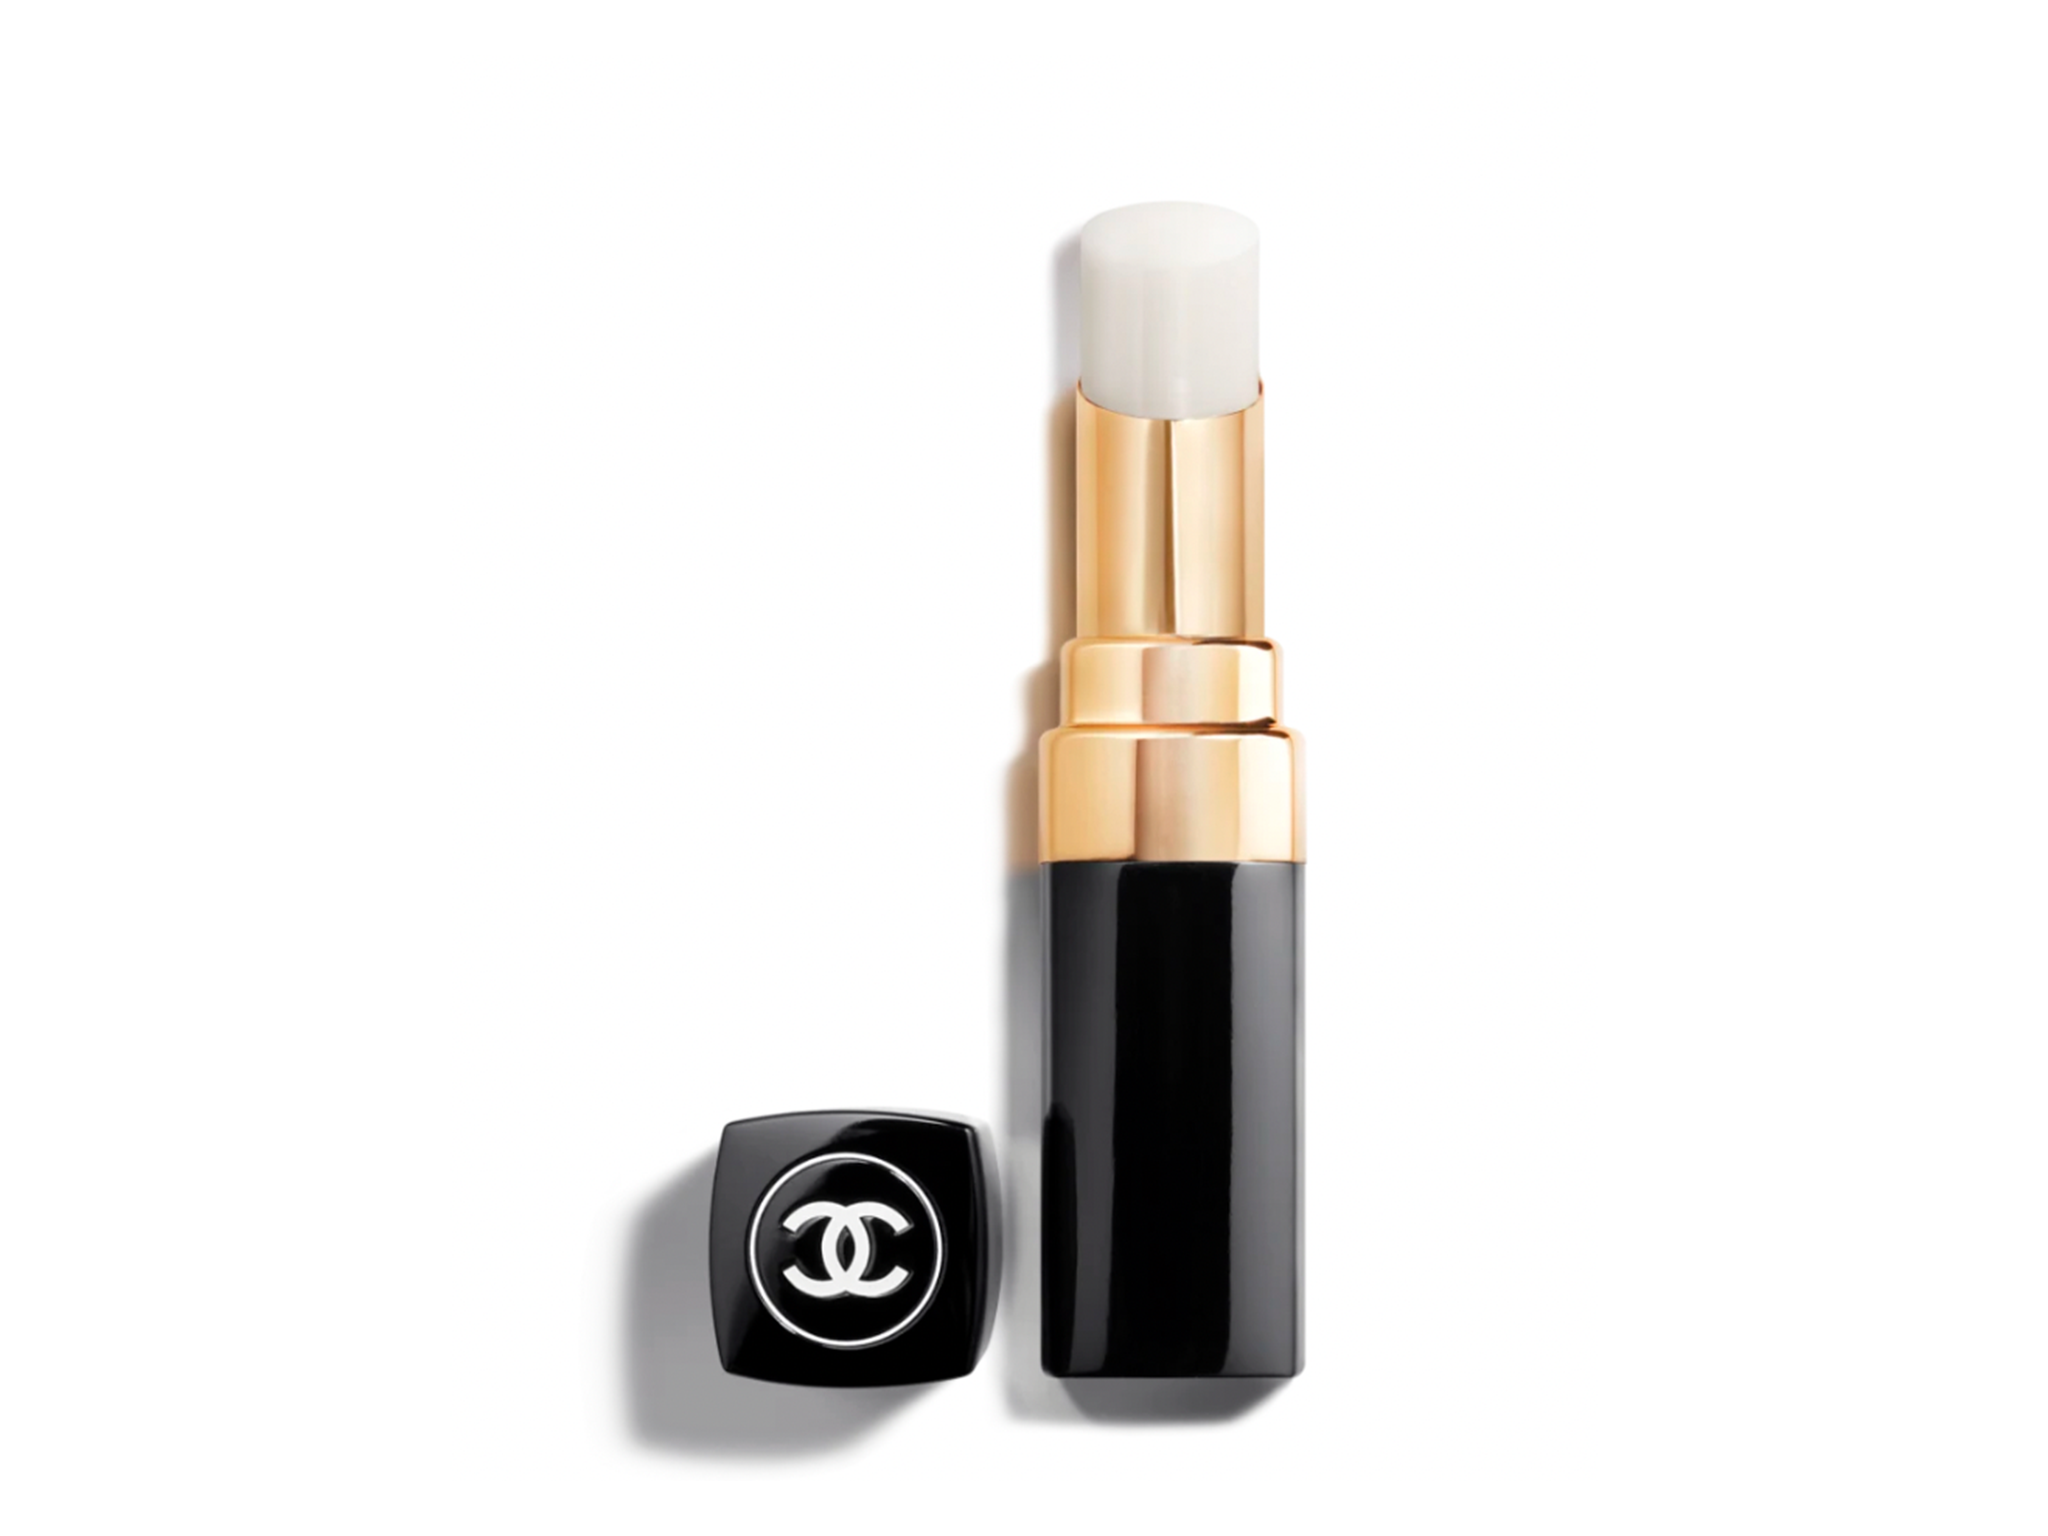 Chanel rogue coco baume review